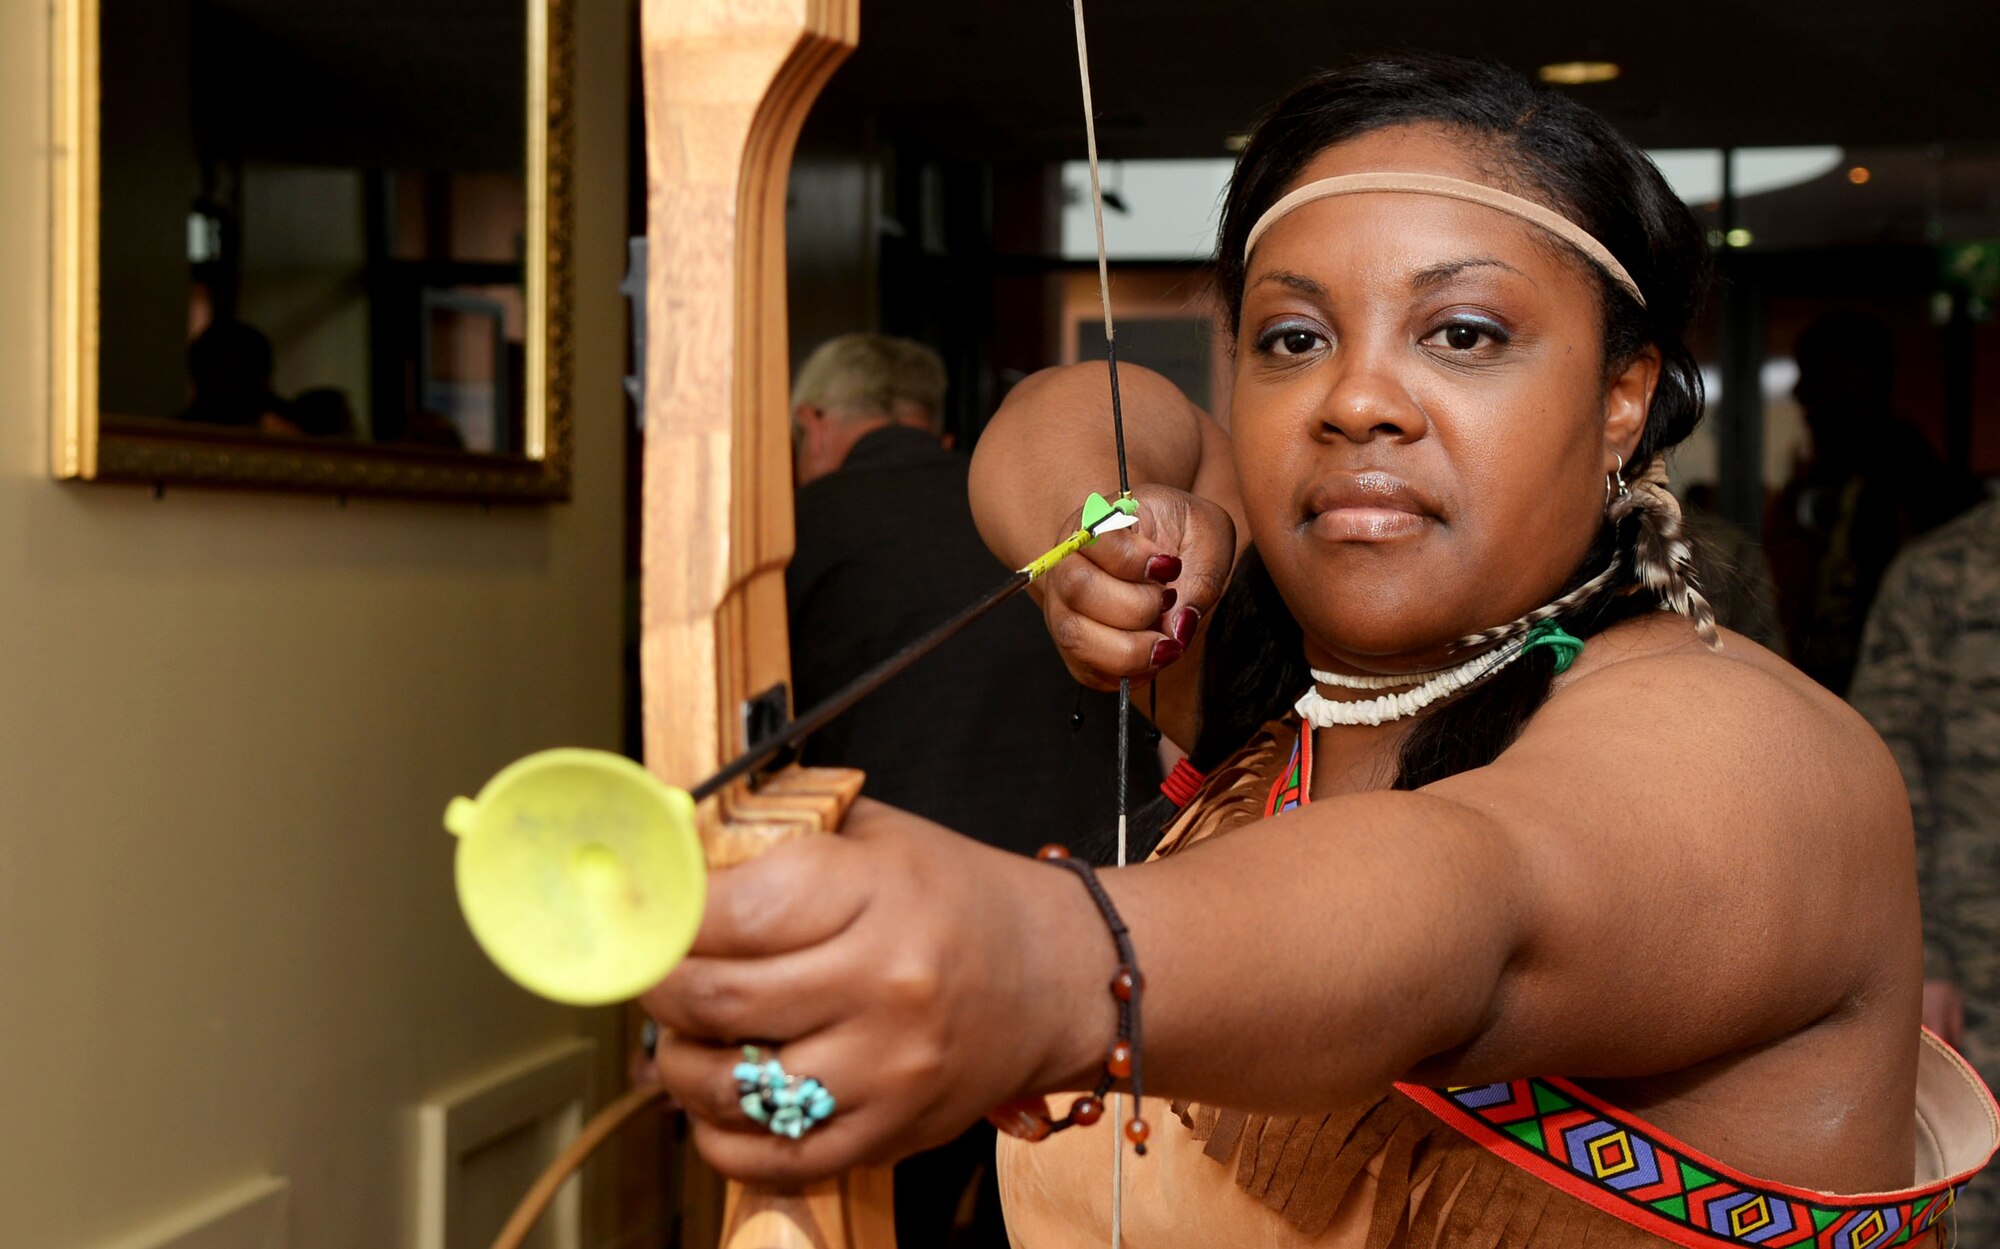 U.S. Air Force Master Sgt. Vivian S. Lewis, 100th Force Support Squadron career assistant advisor, shoots a bow-and-arrow at Team Mildenhall’s Diversity Day celebration July 15, 2016, on RAF Mildenhall, England. Lewis was dressed in Native American attire to highlight their culture and heritage. (U.S. Air Force photo by Airman 1st Class Tenley Long)